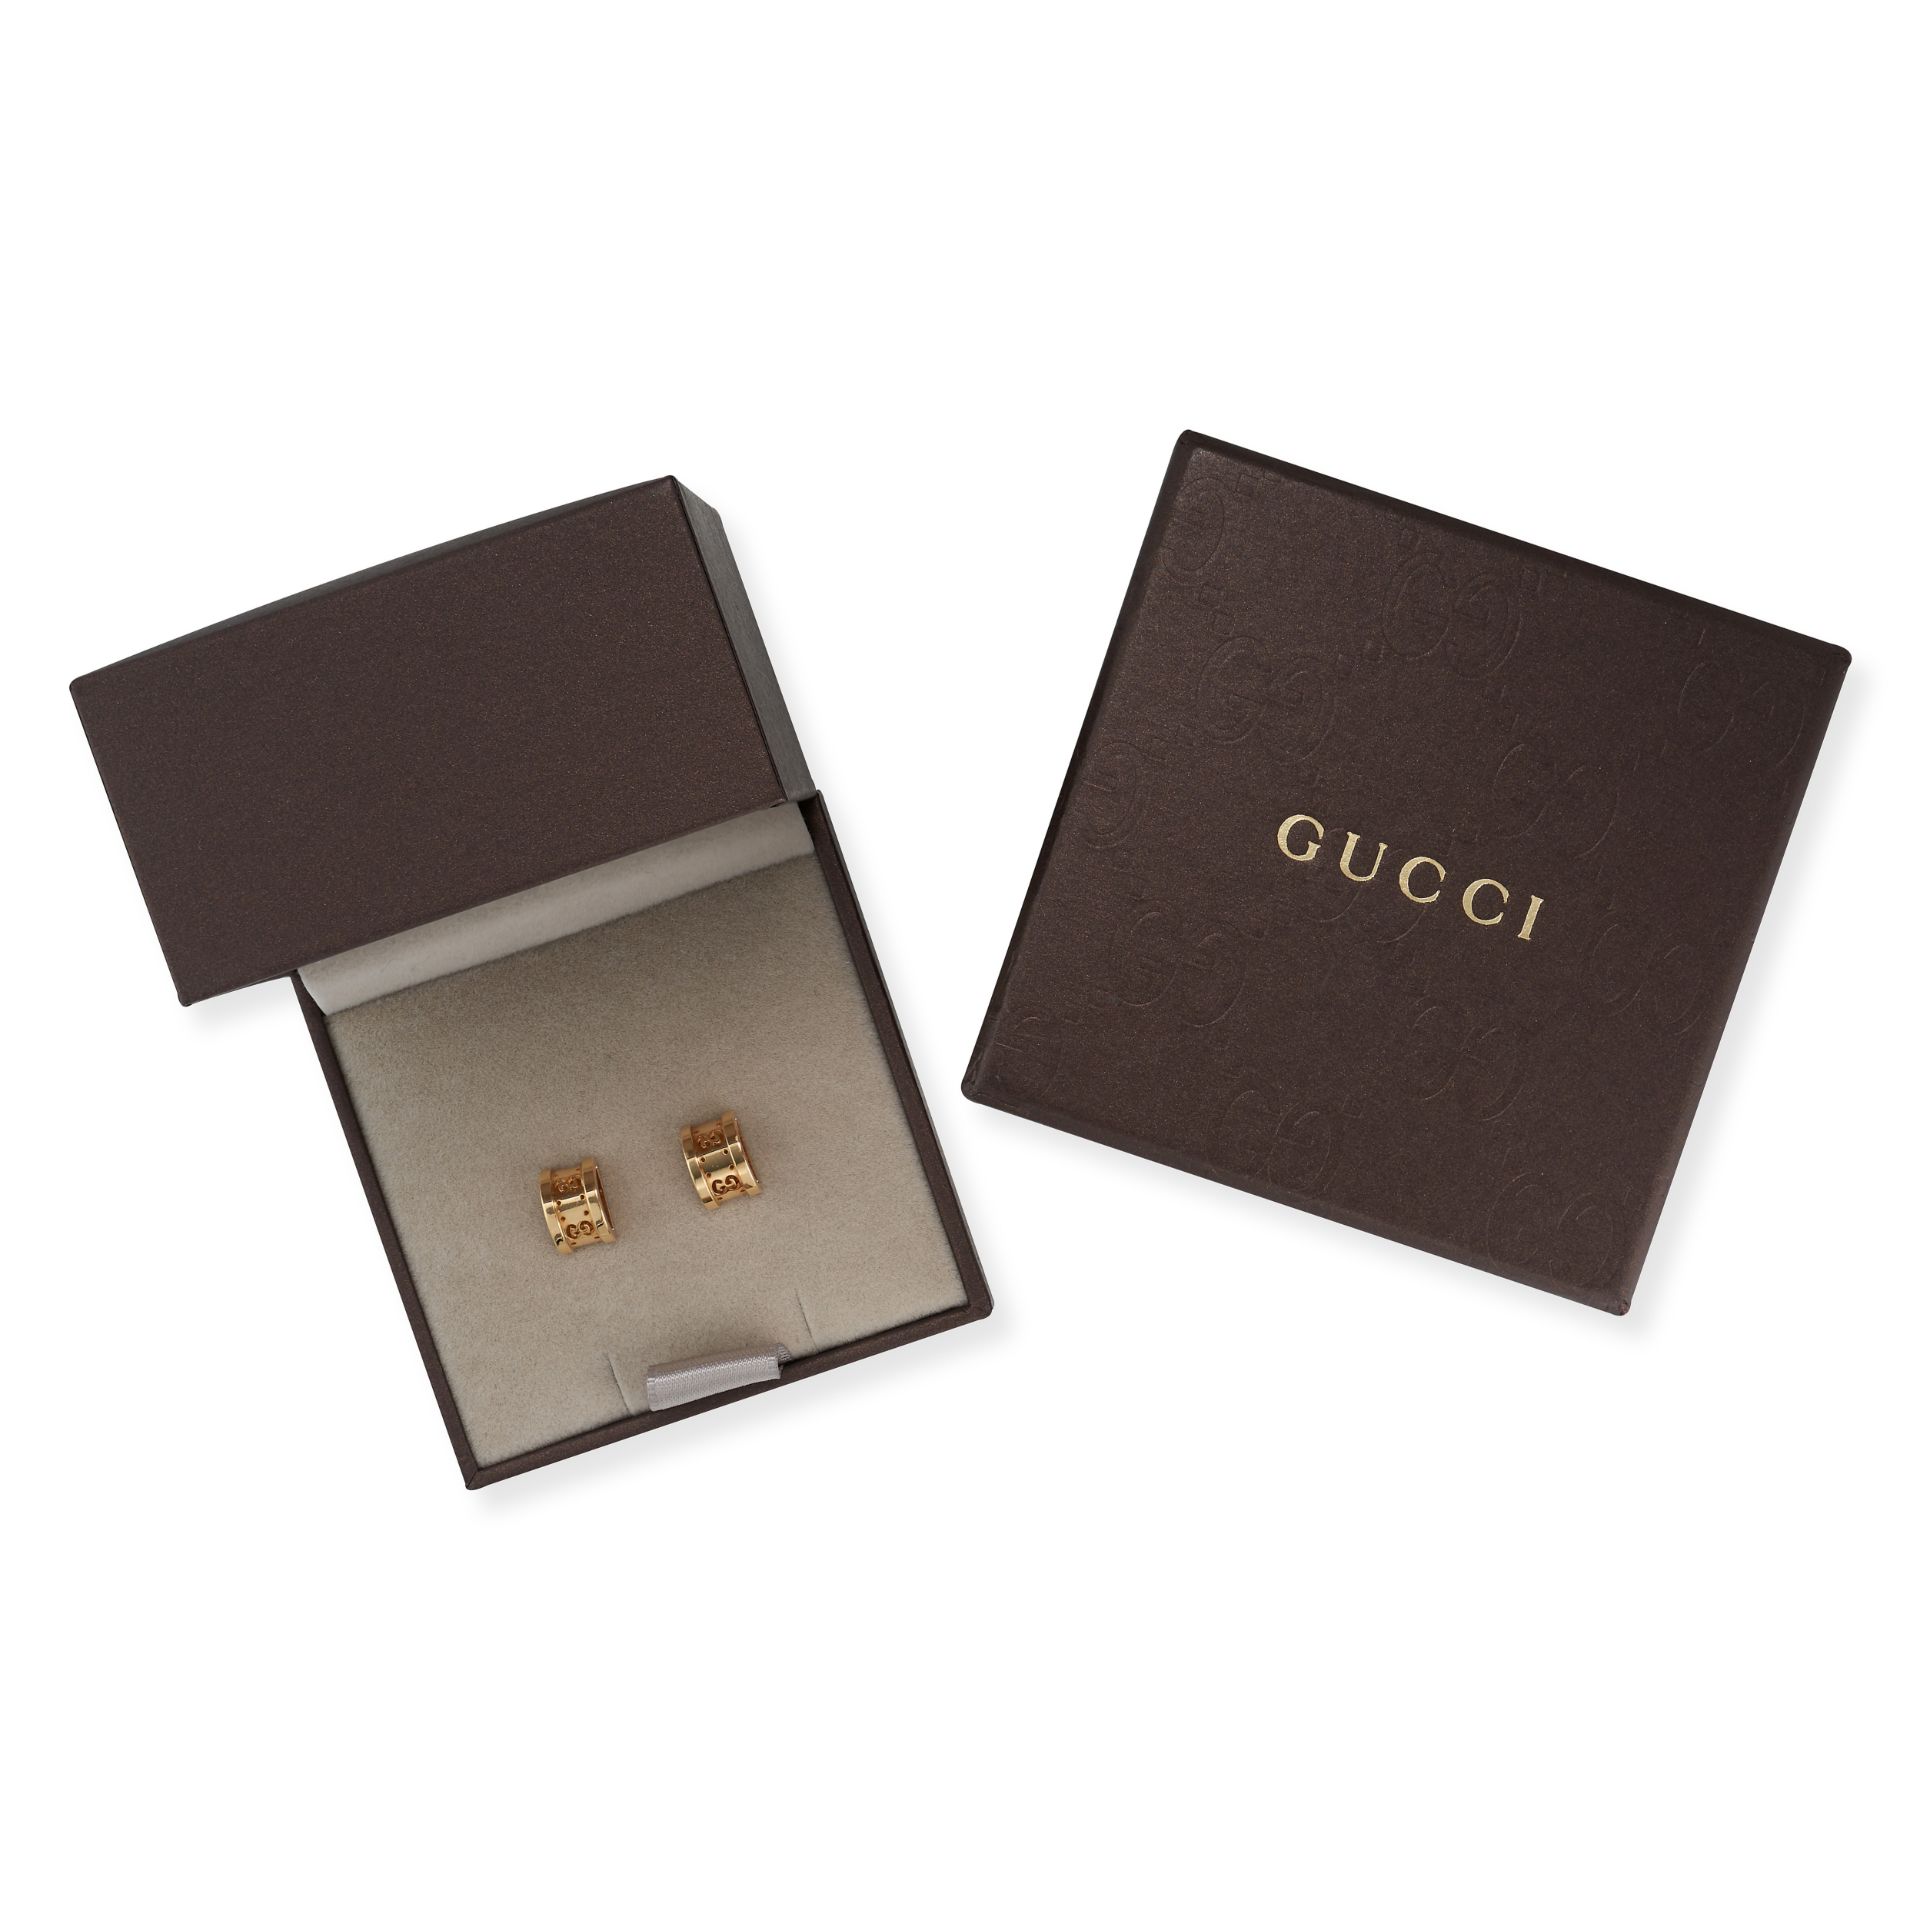 NO RESERVE - GUCCI, A PAIR OF GG LOGO STUD EARRINGS, signed 'Gucci', 1cm, 4g. Include original st... - Image 2 of 2